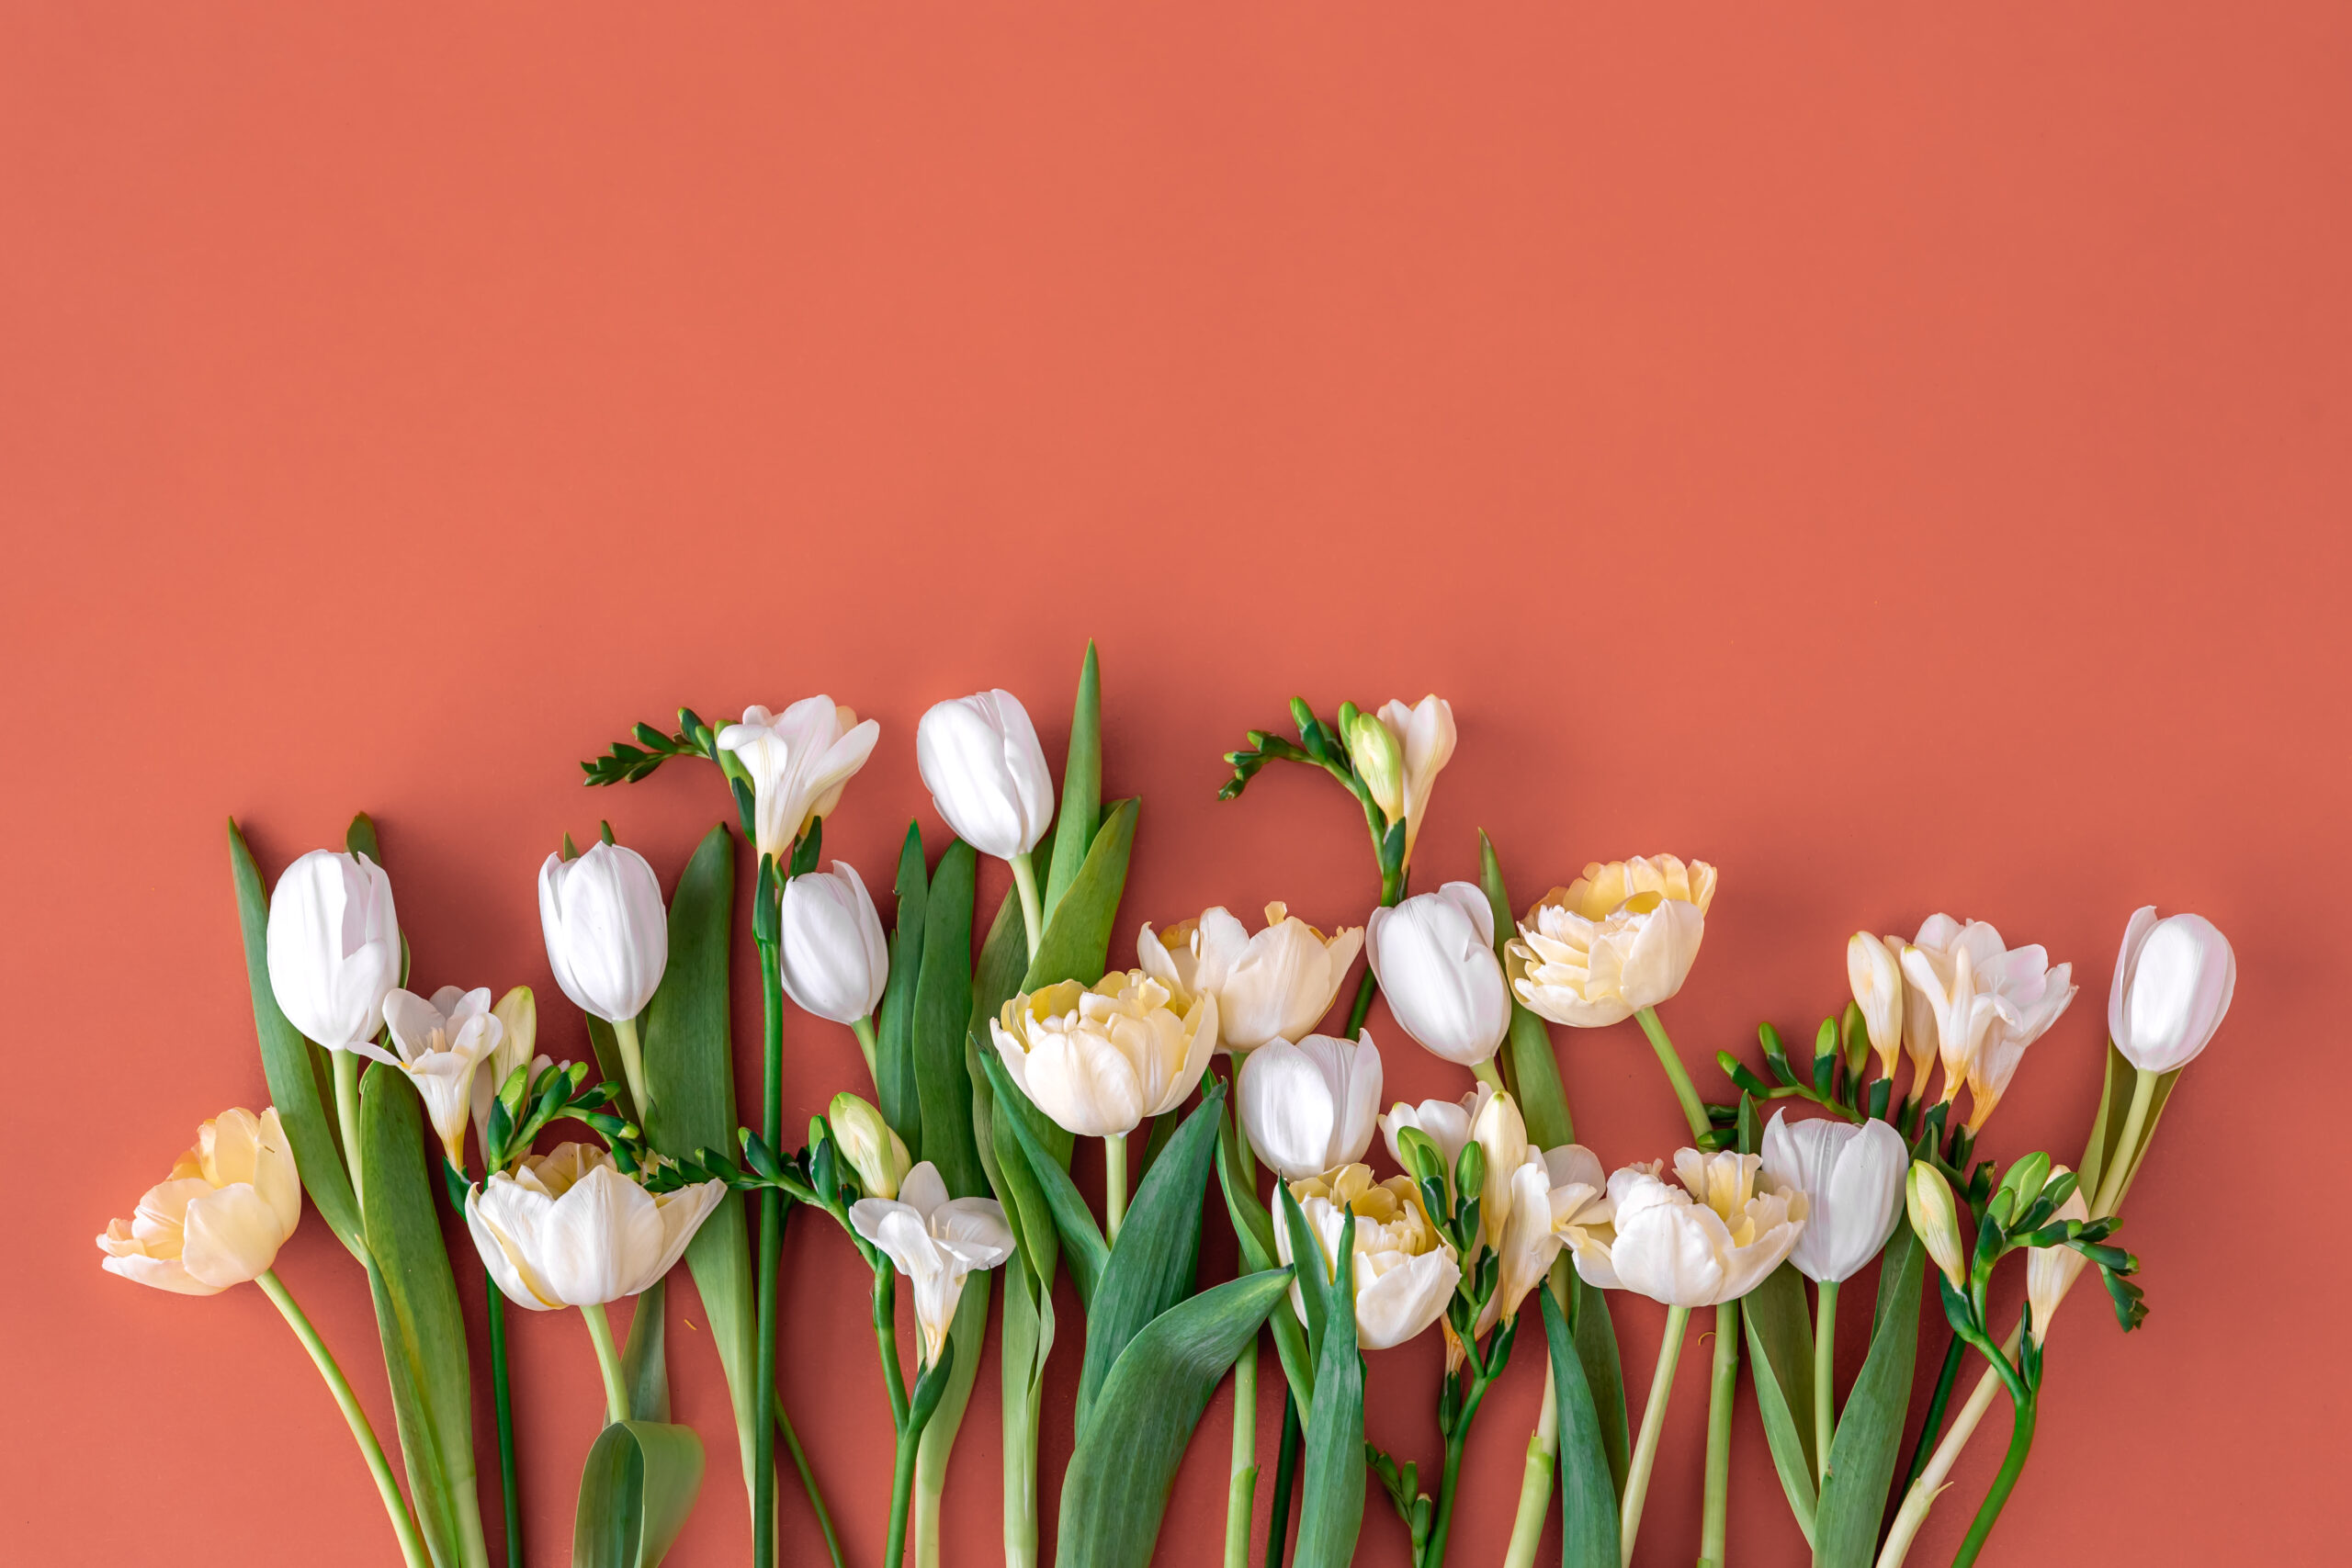 Bouquet of white tulips on a red background, flat lay, floral background.